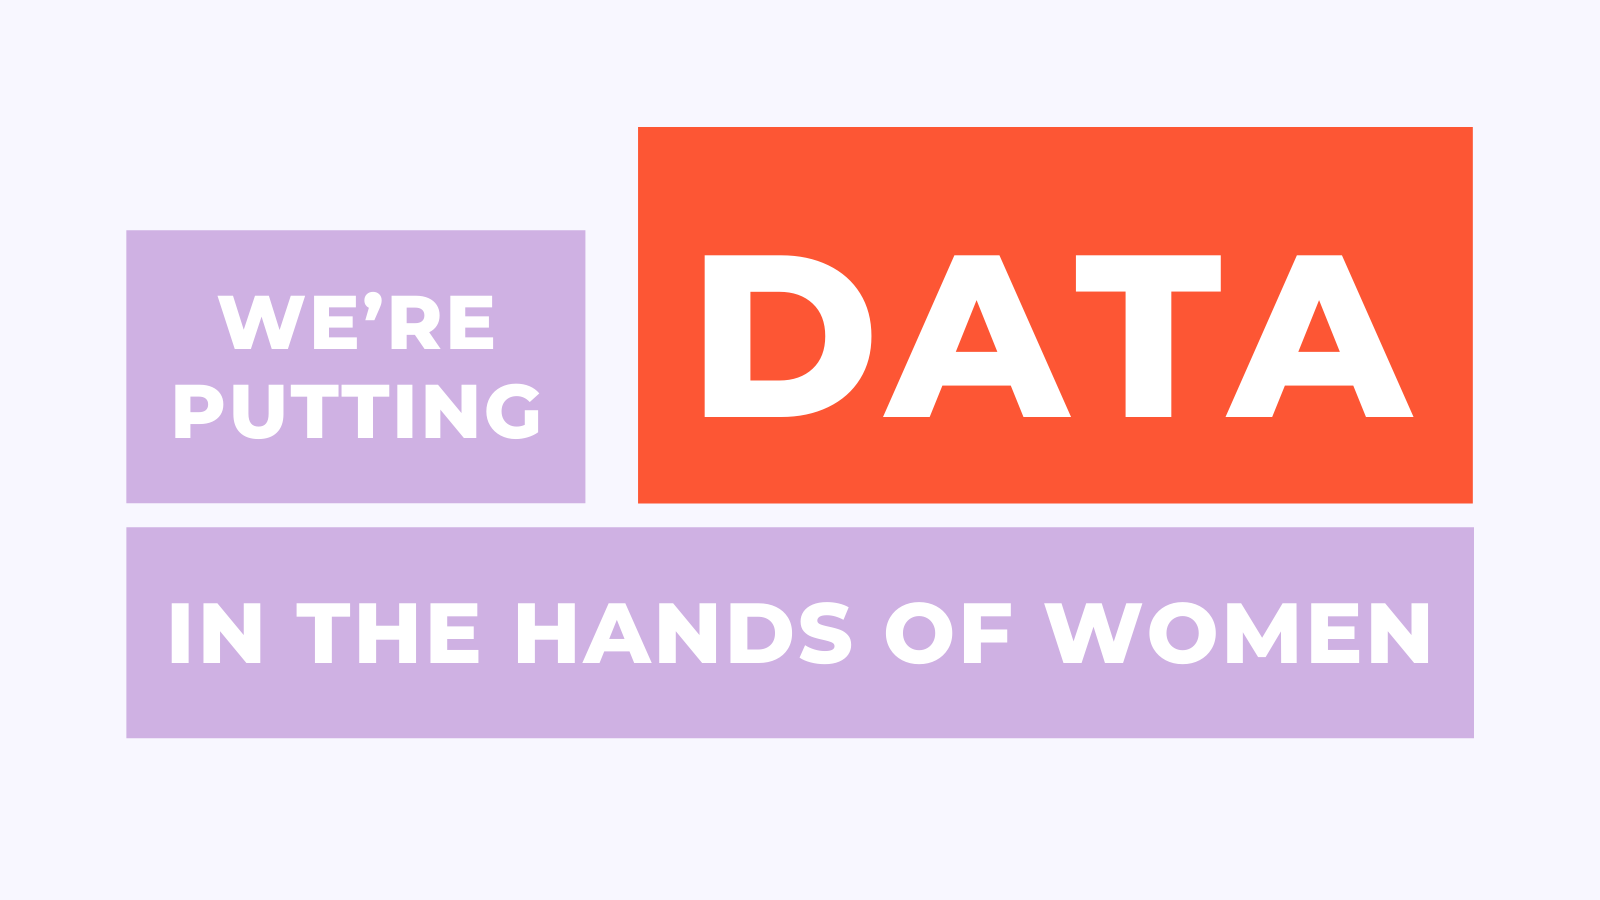 Orange and purple block text "We're putting data in the hands of women"